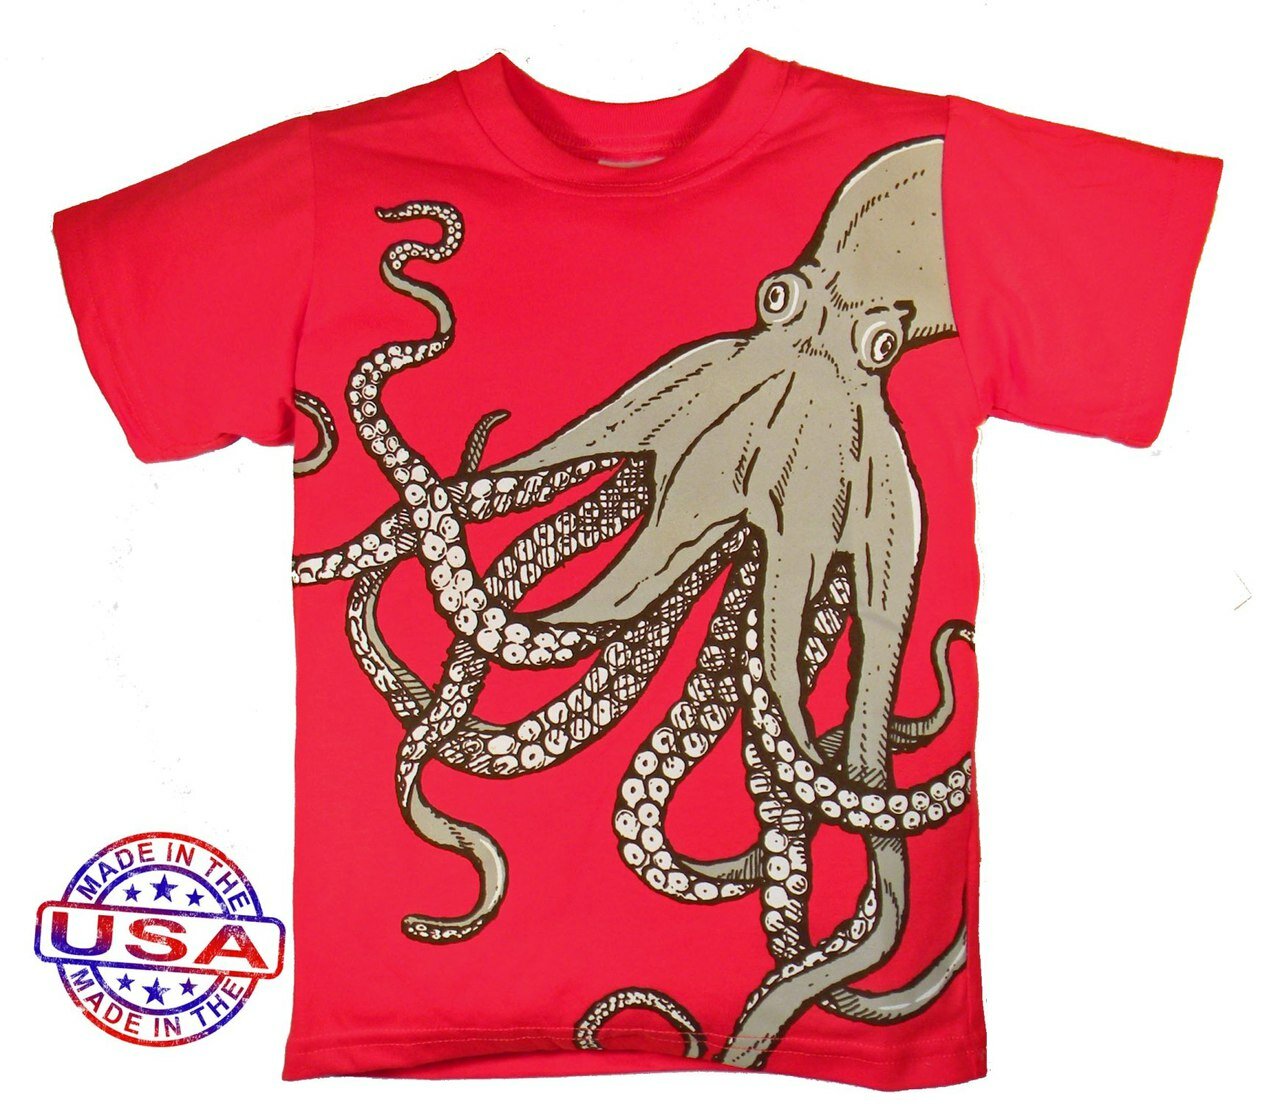 Boys' Octopus Shirt by Tumbleweed (Size: 4)